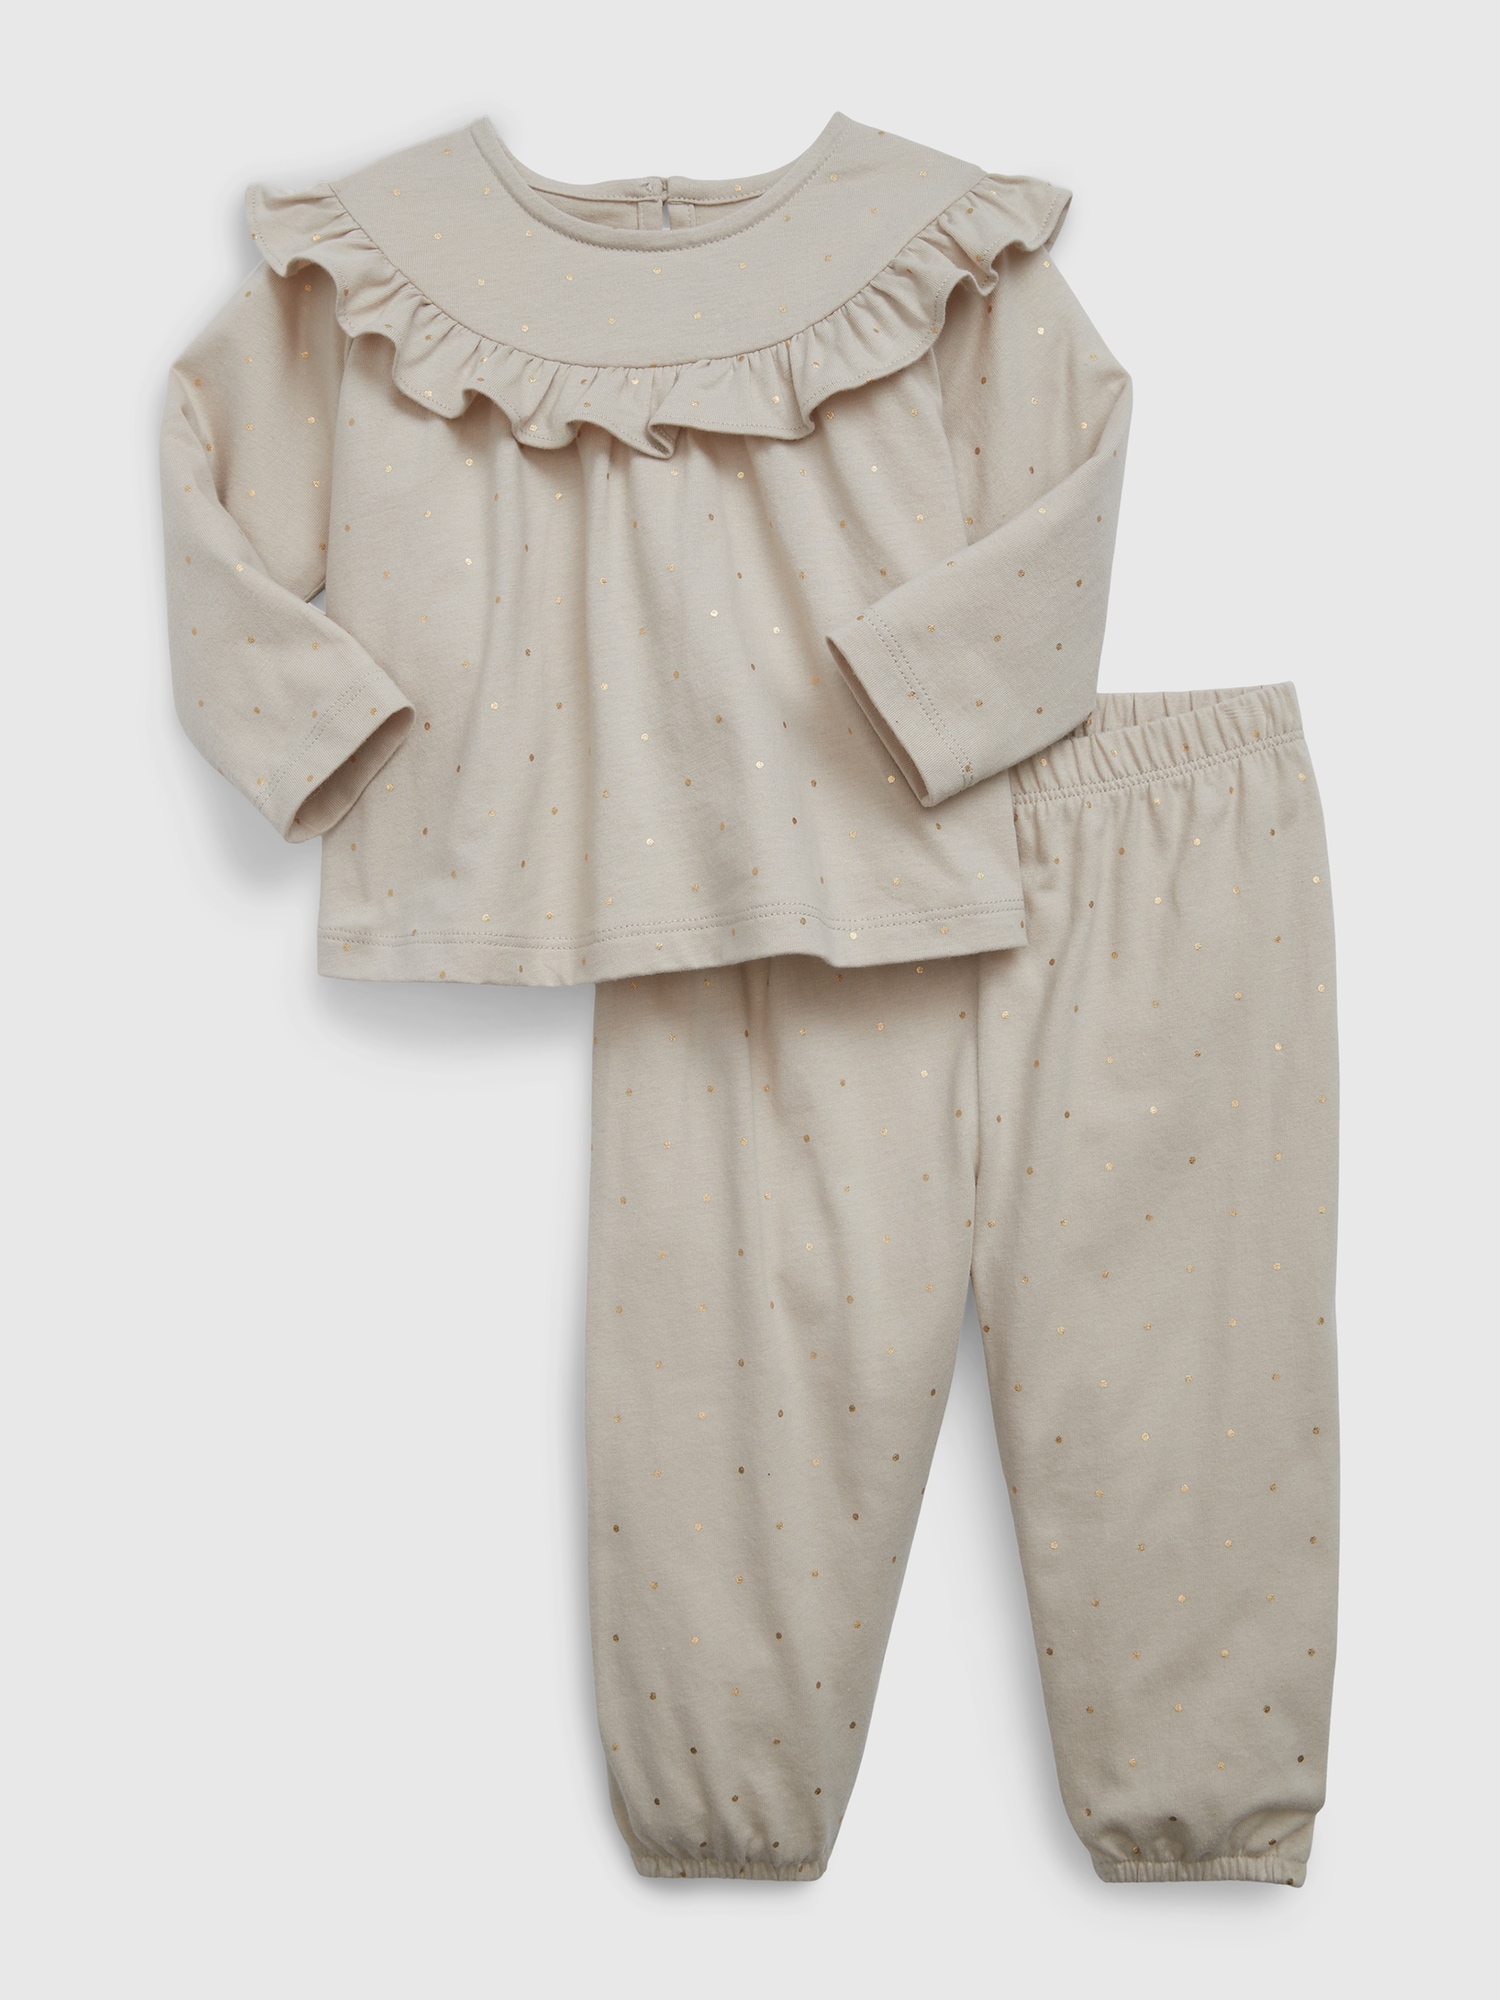 Baby First Favorites Organic Cotton Ruffle Outfit Set